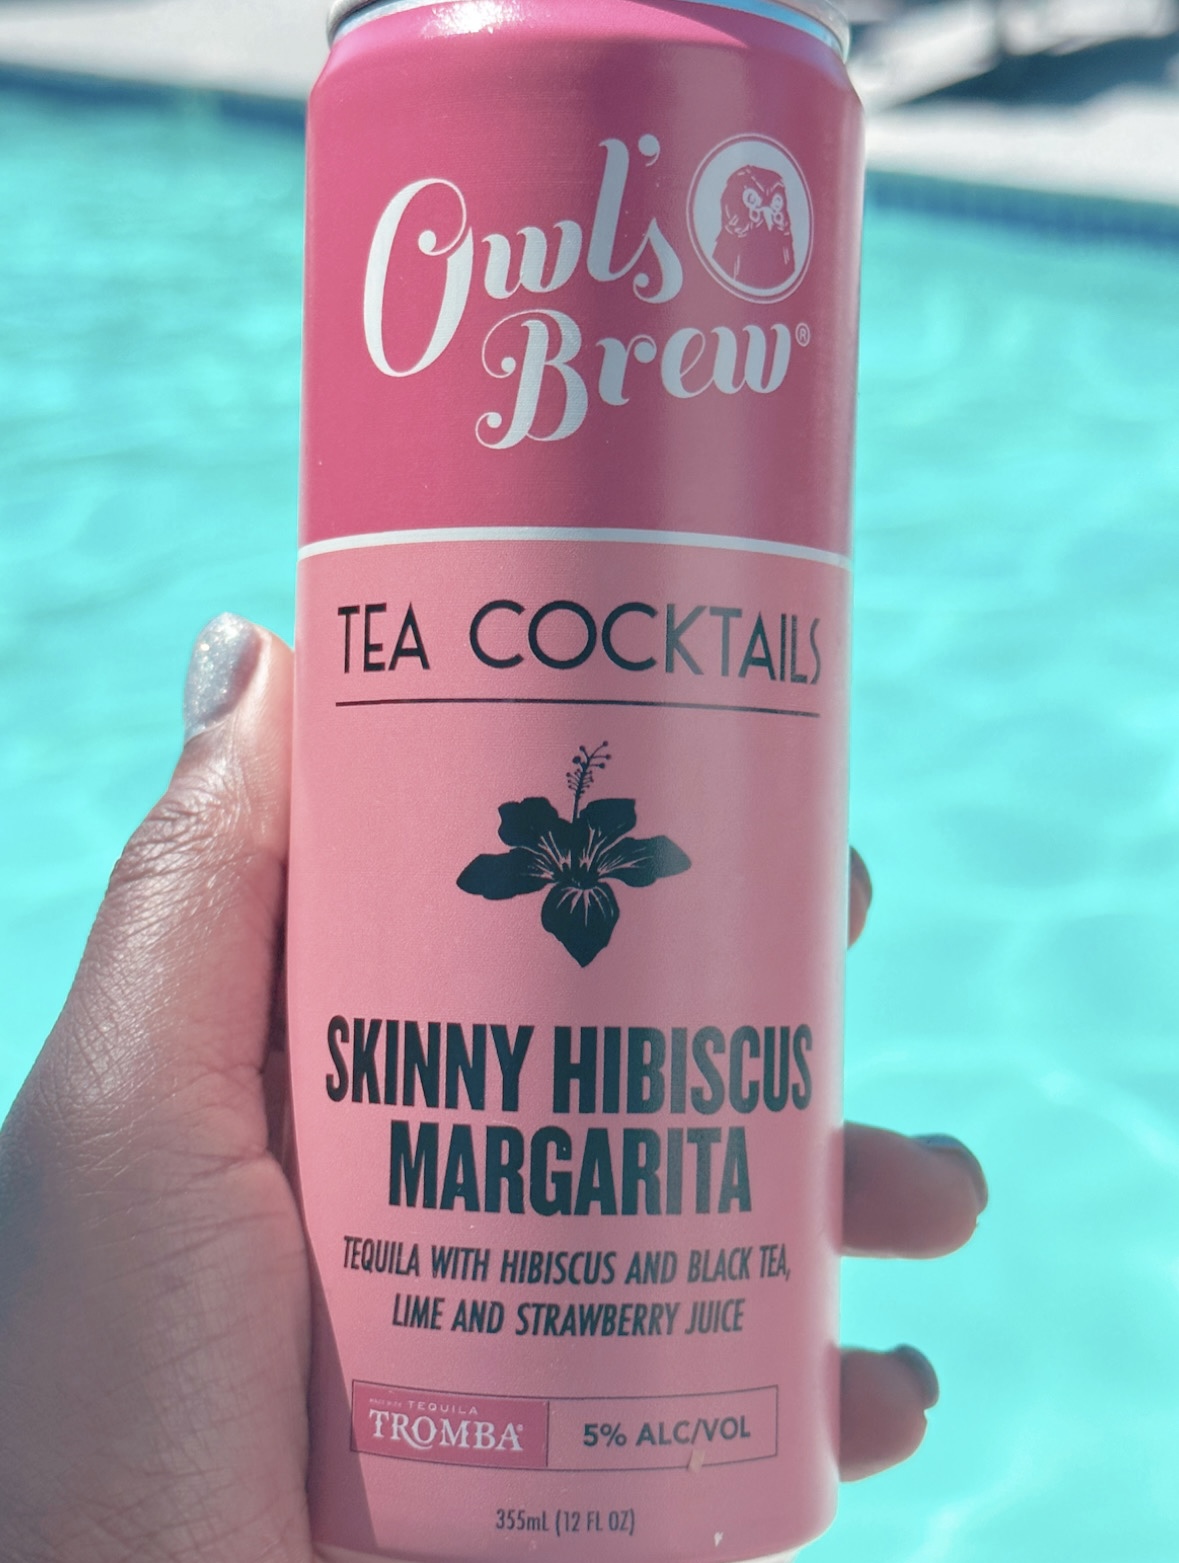 An image of Owl's Brew canned cocktails, perfect for your next beach day.